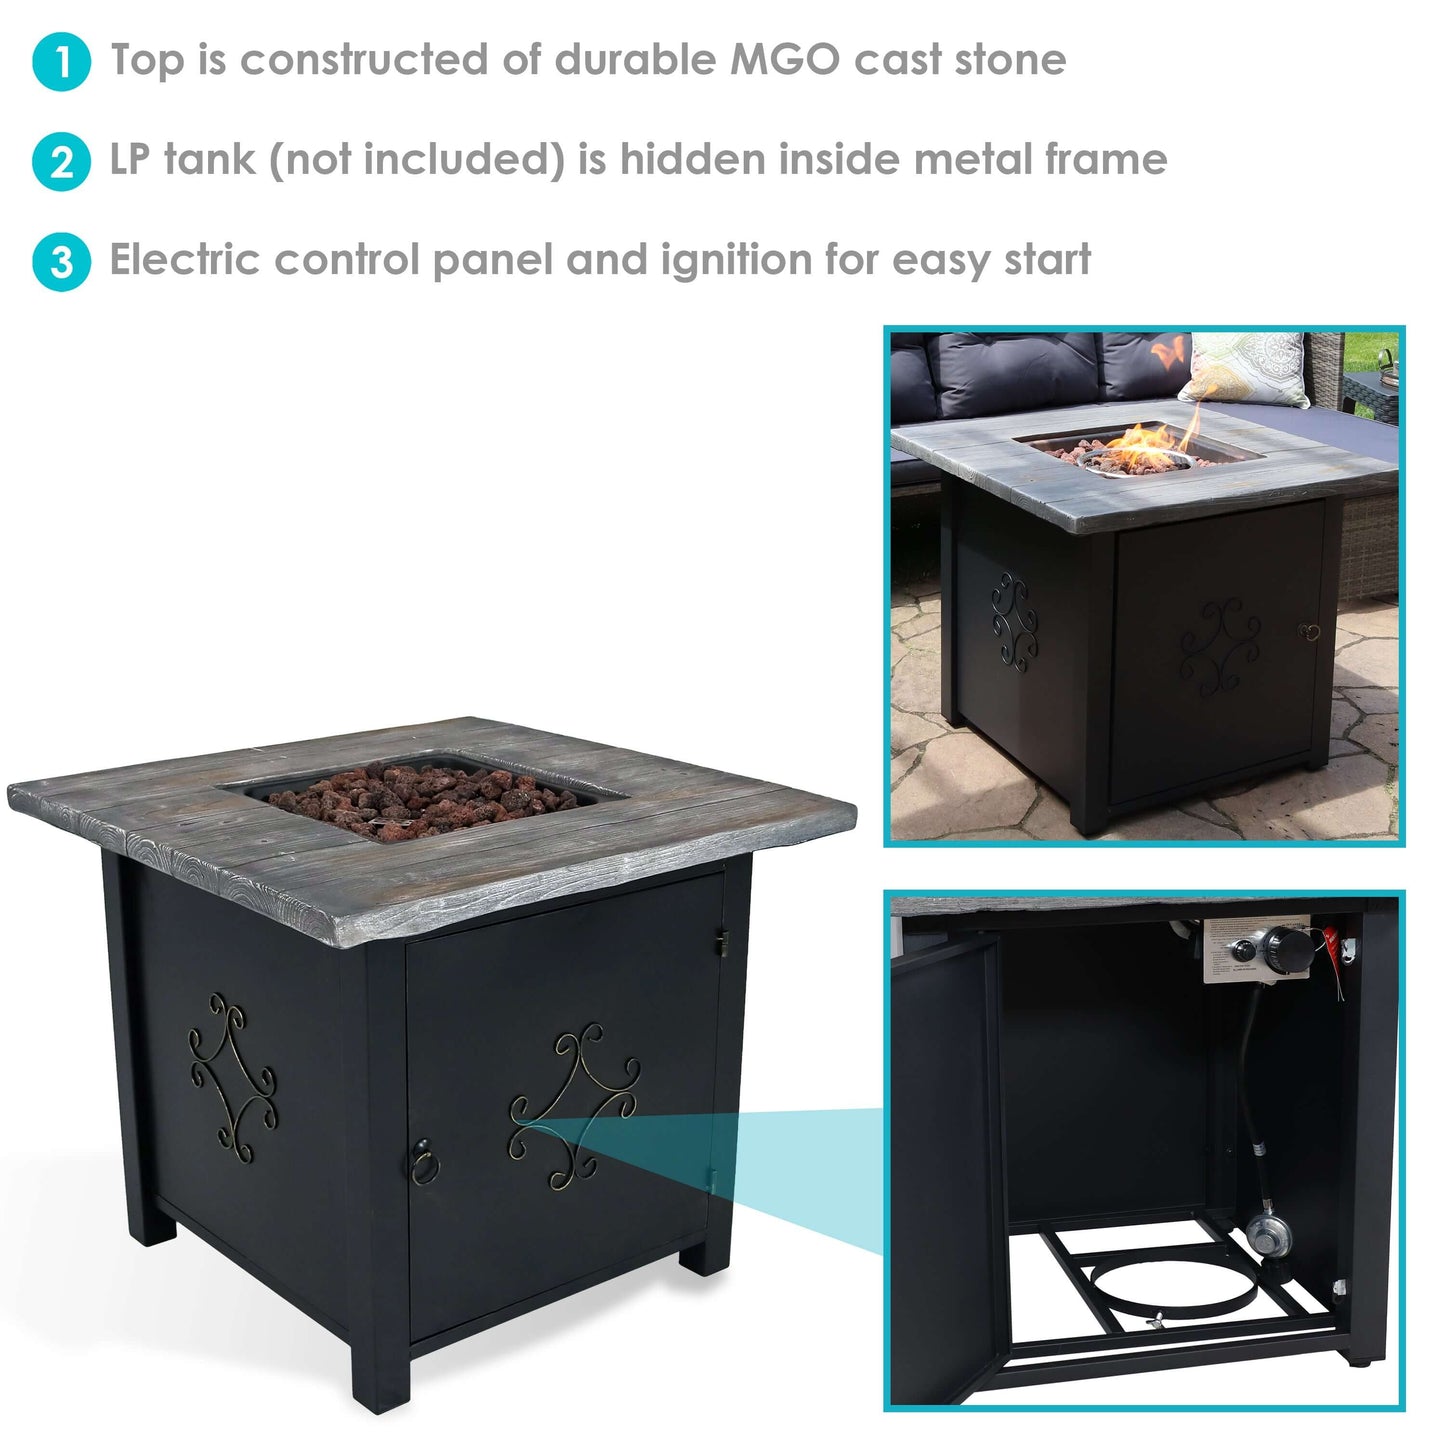 30" Square Smokeless Fire Pit Table with Lava Rocks